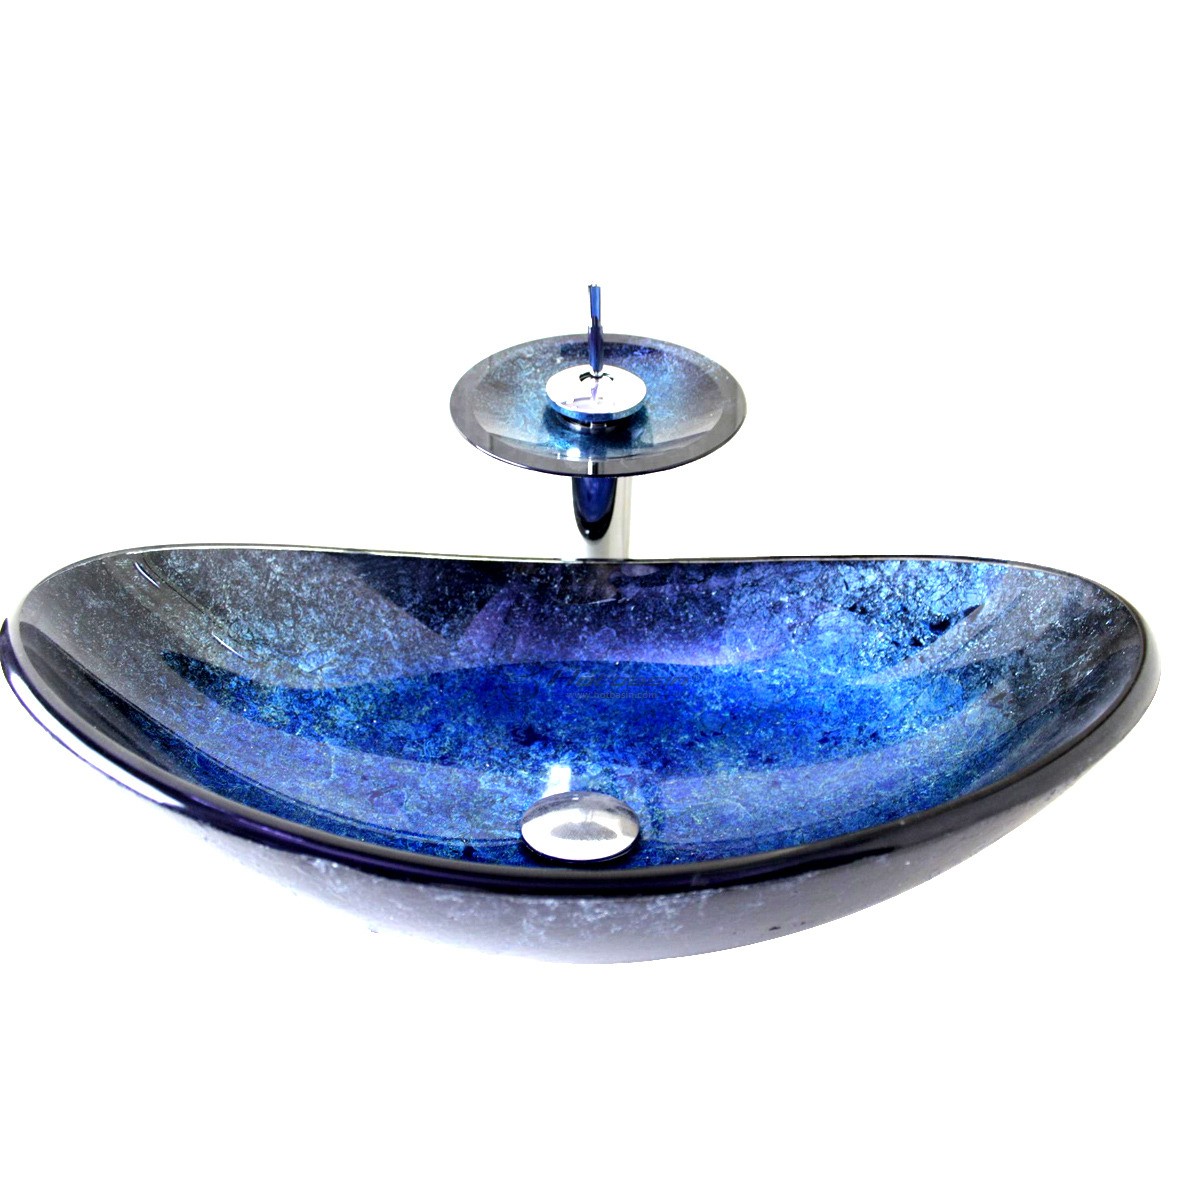 Blue starry like glass vessel sink with faucet and drainer